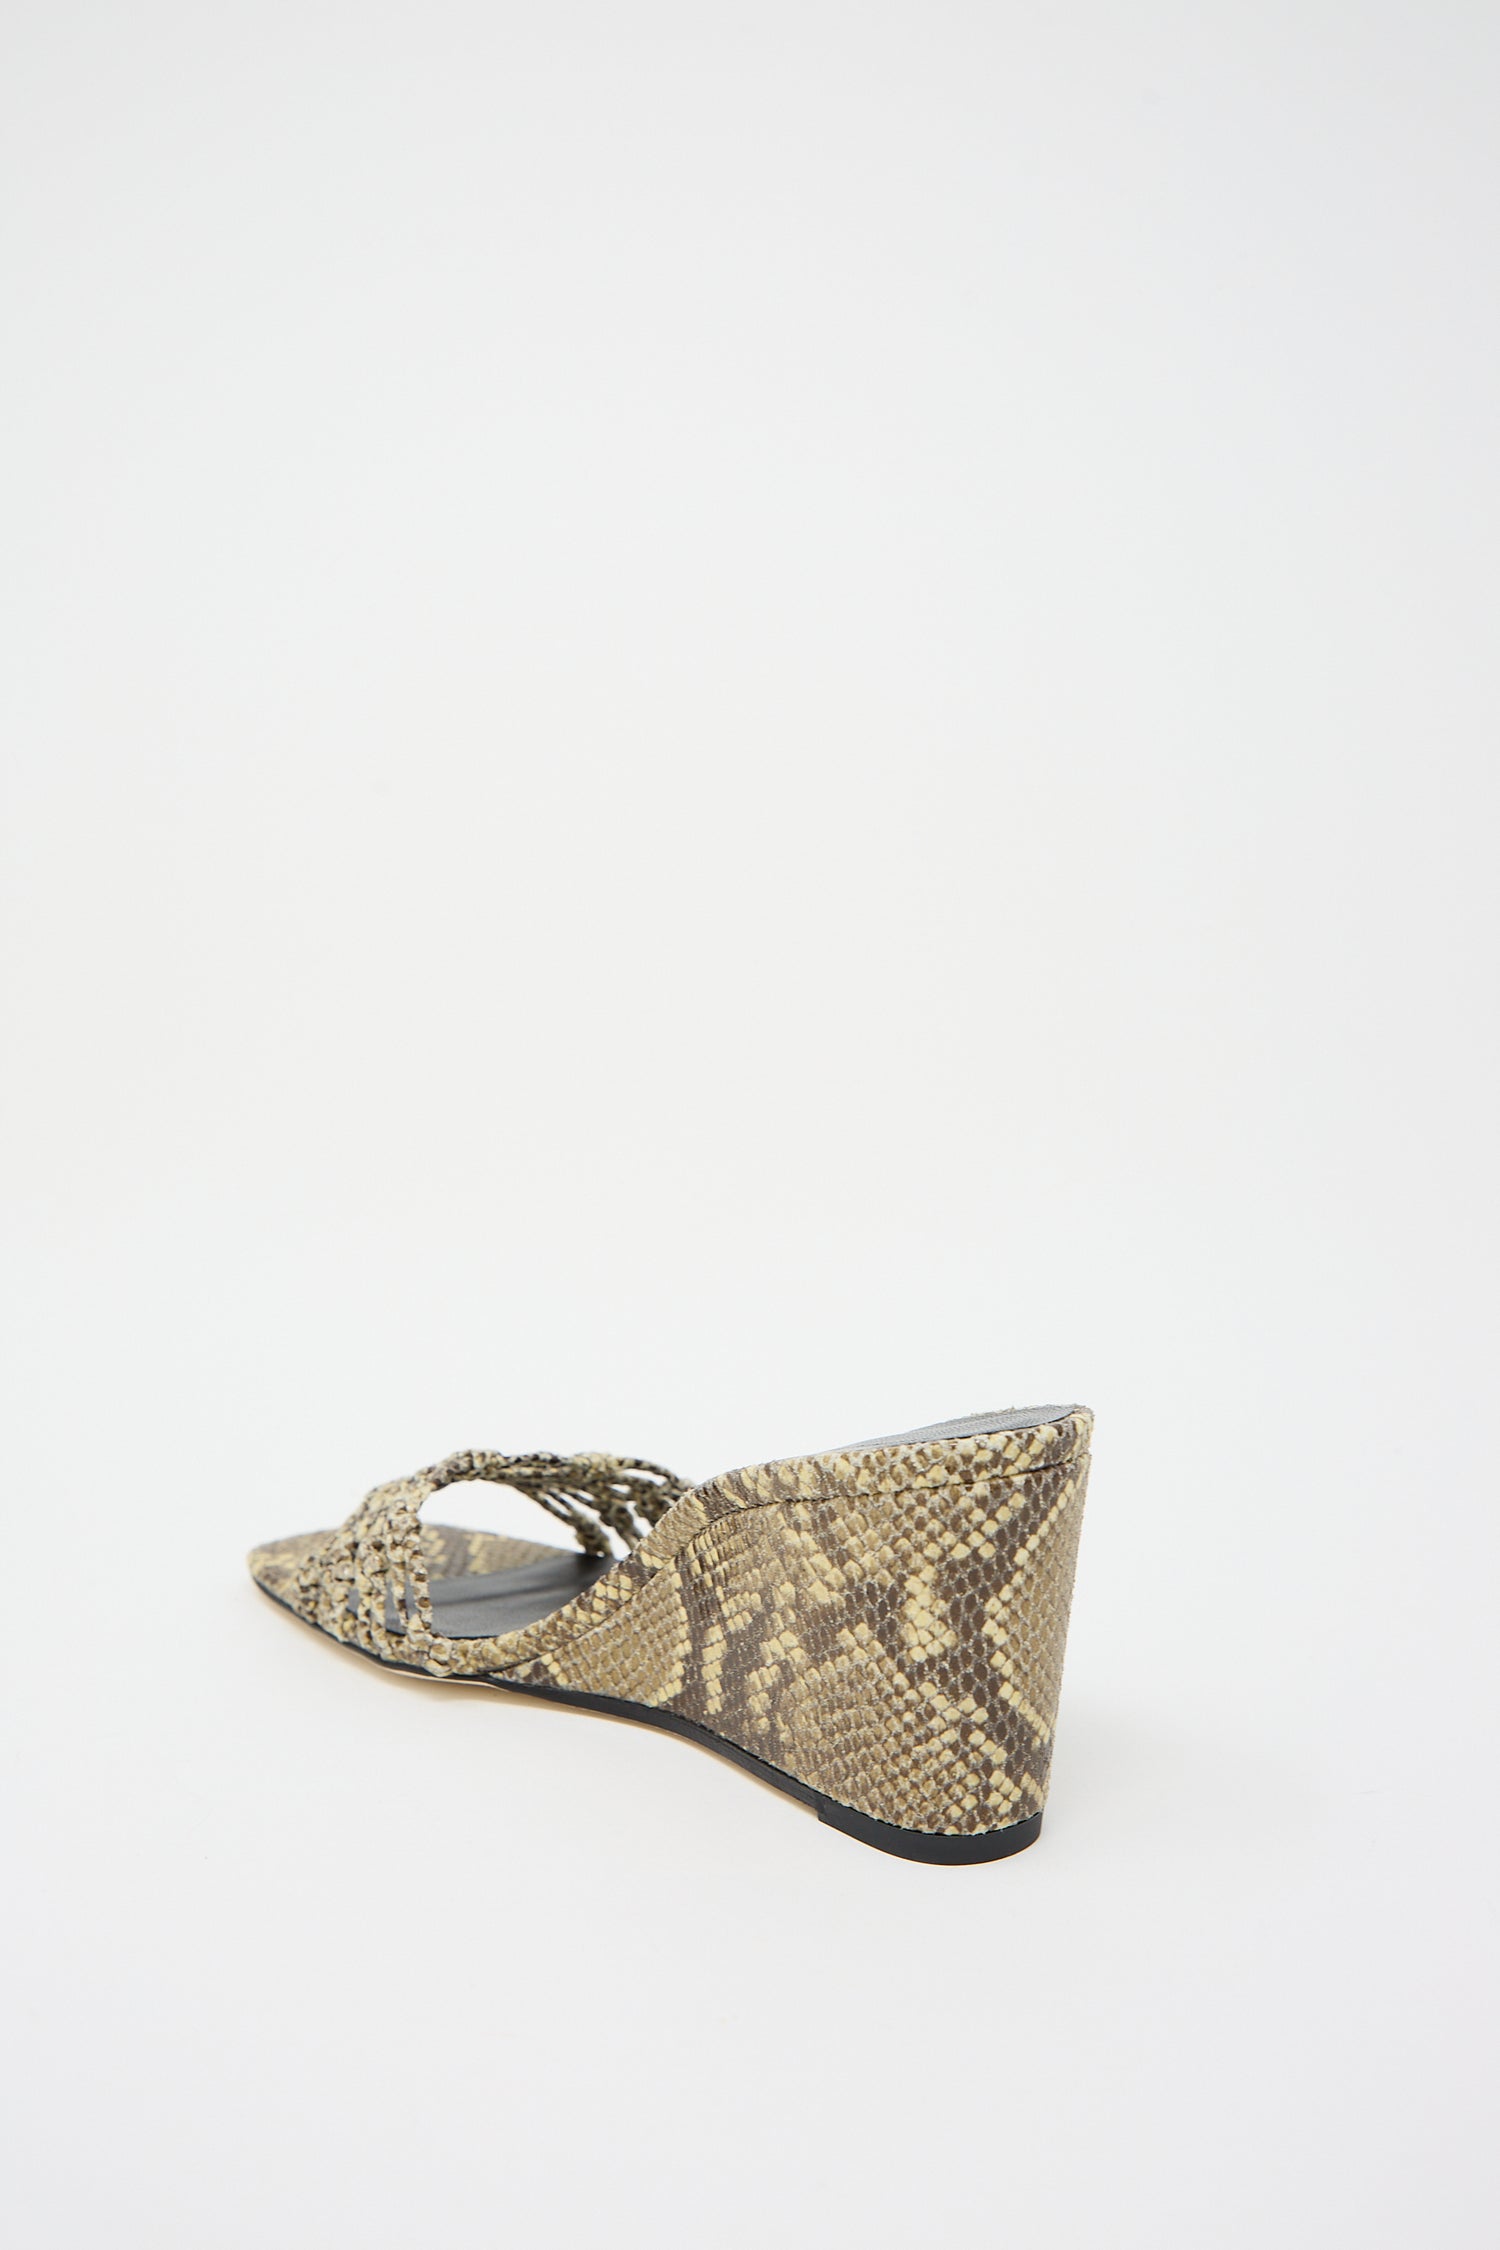 A single Rejina Pyo Leather Print Kyle Wedge in Snake Butter with a woven front strap against a white background.